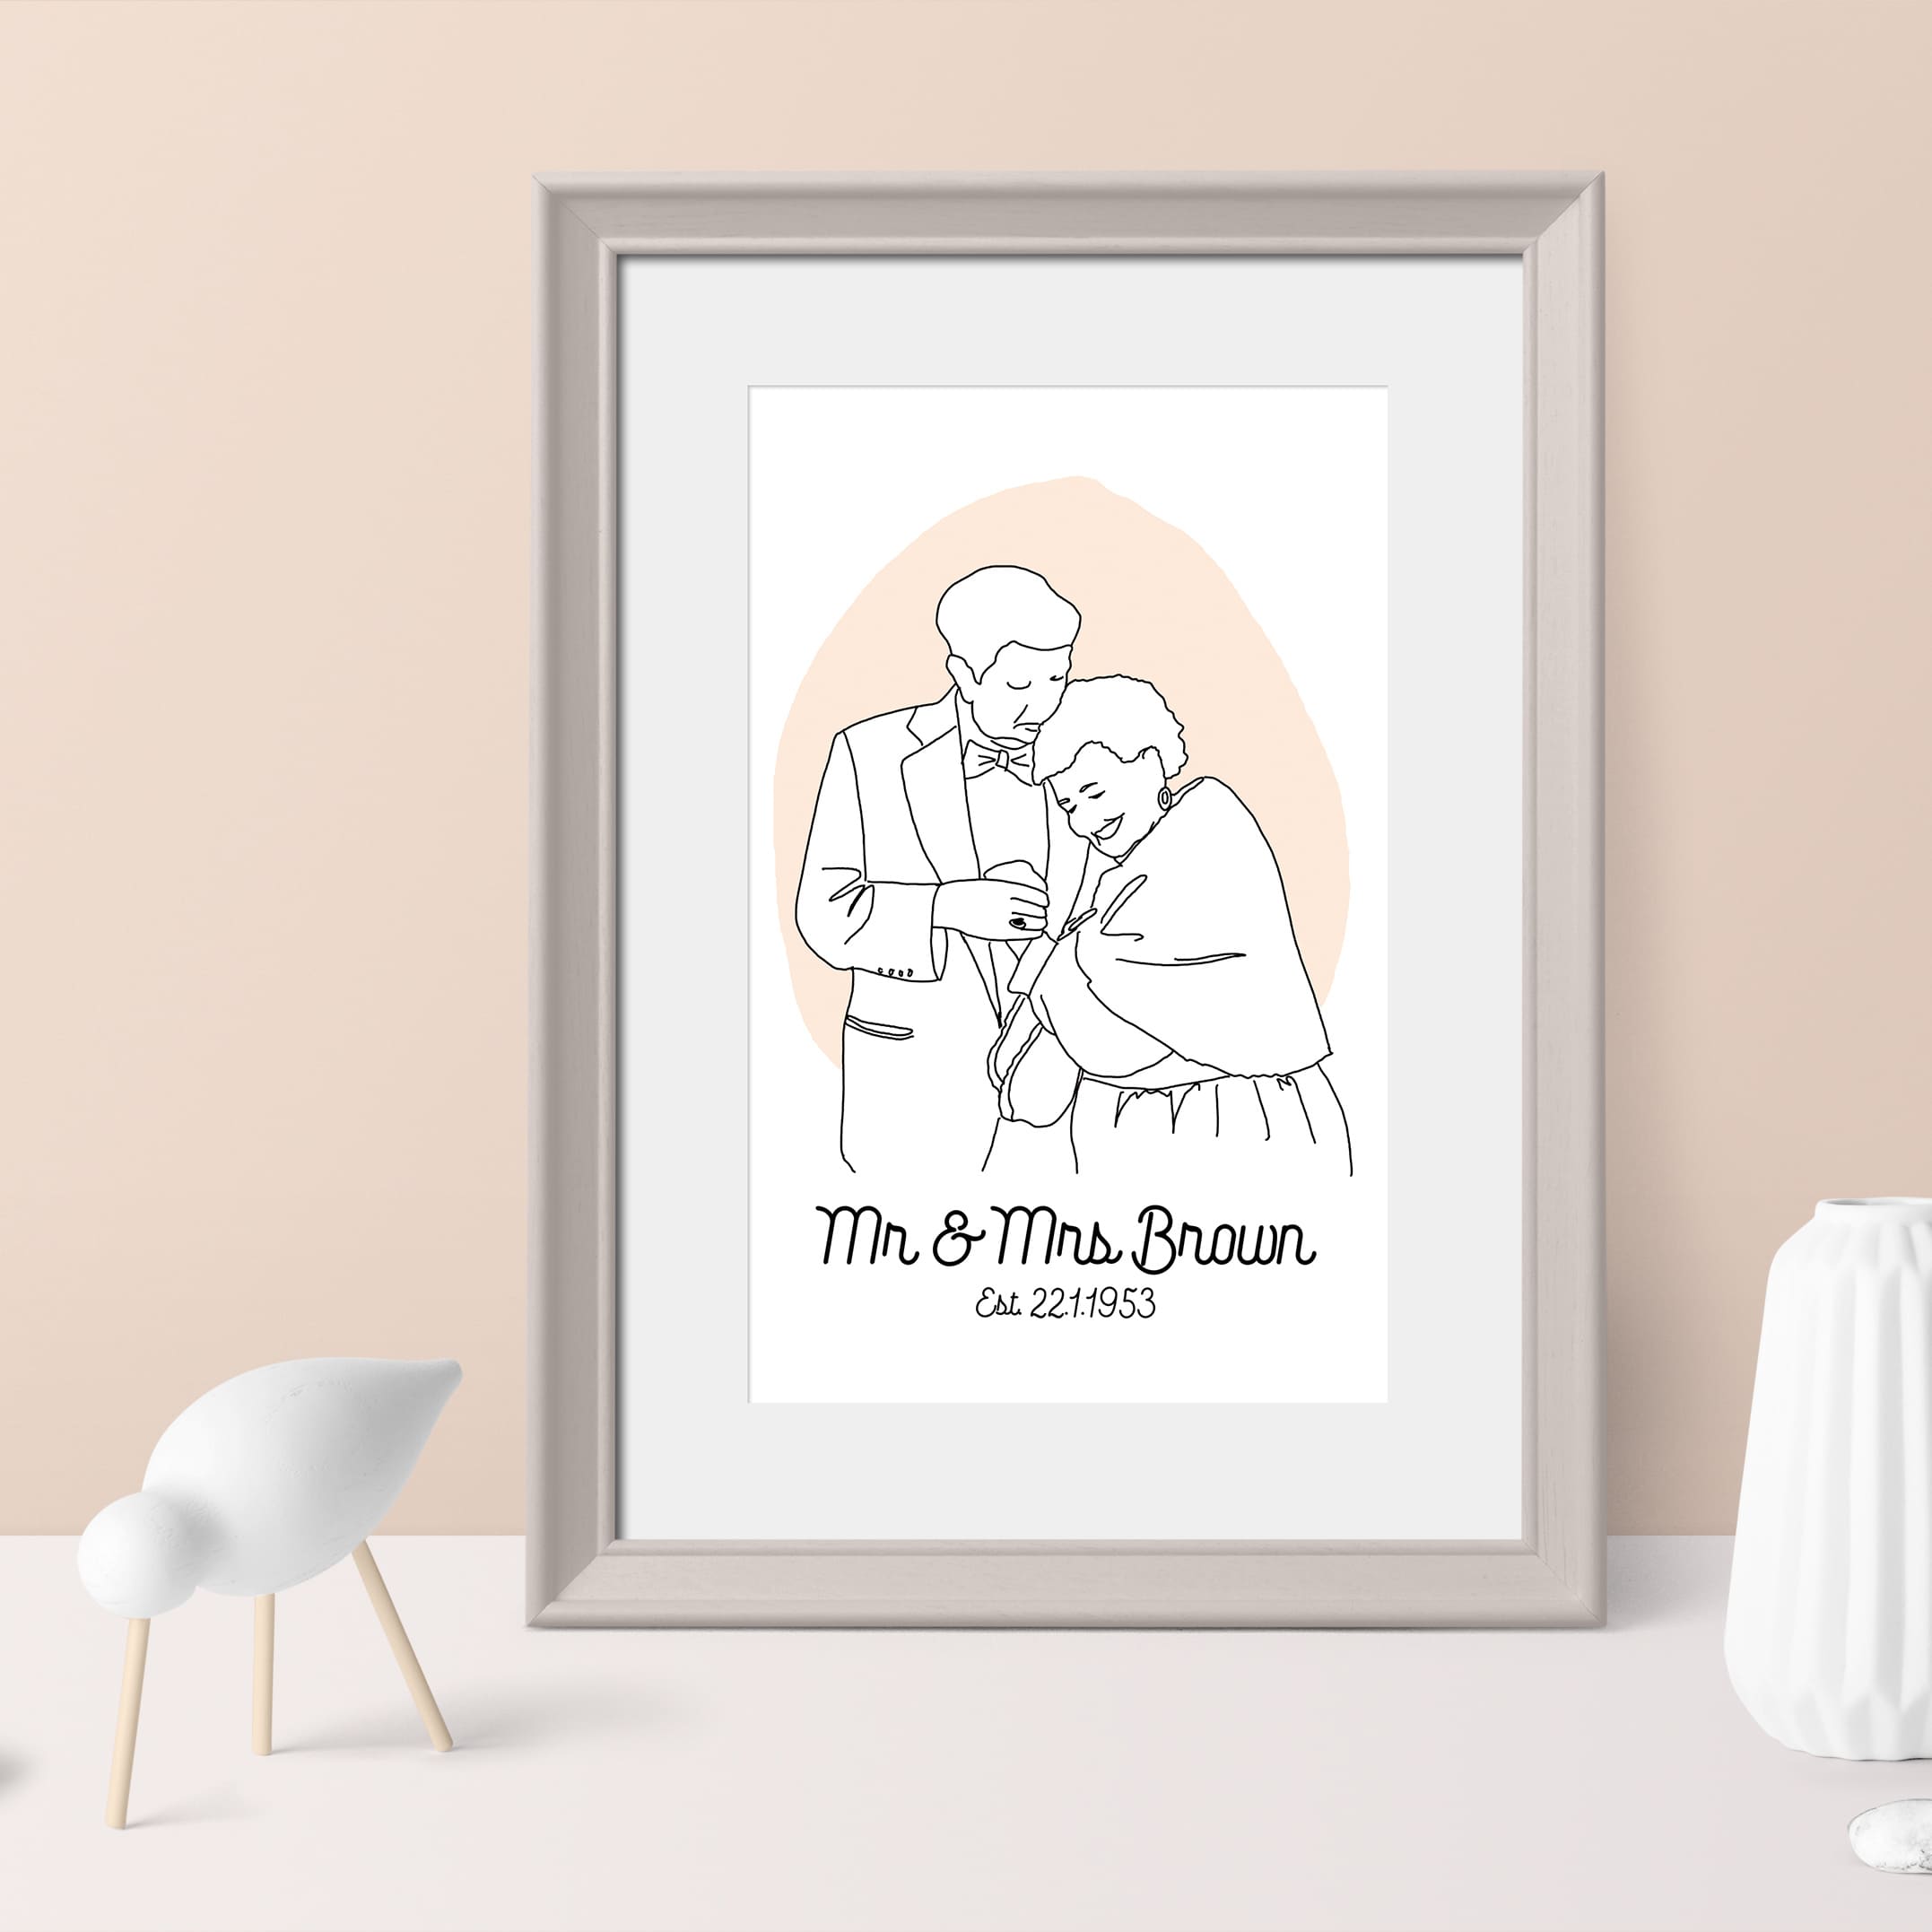 50s wedding anniversary portrait in minimal line art style with names and date as wall decor and keepsake